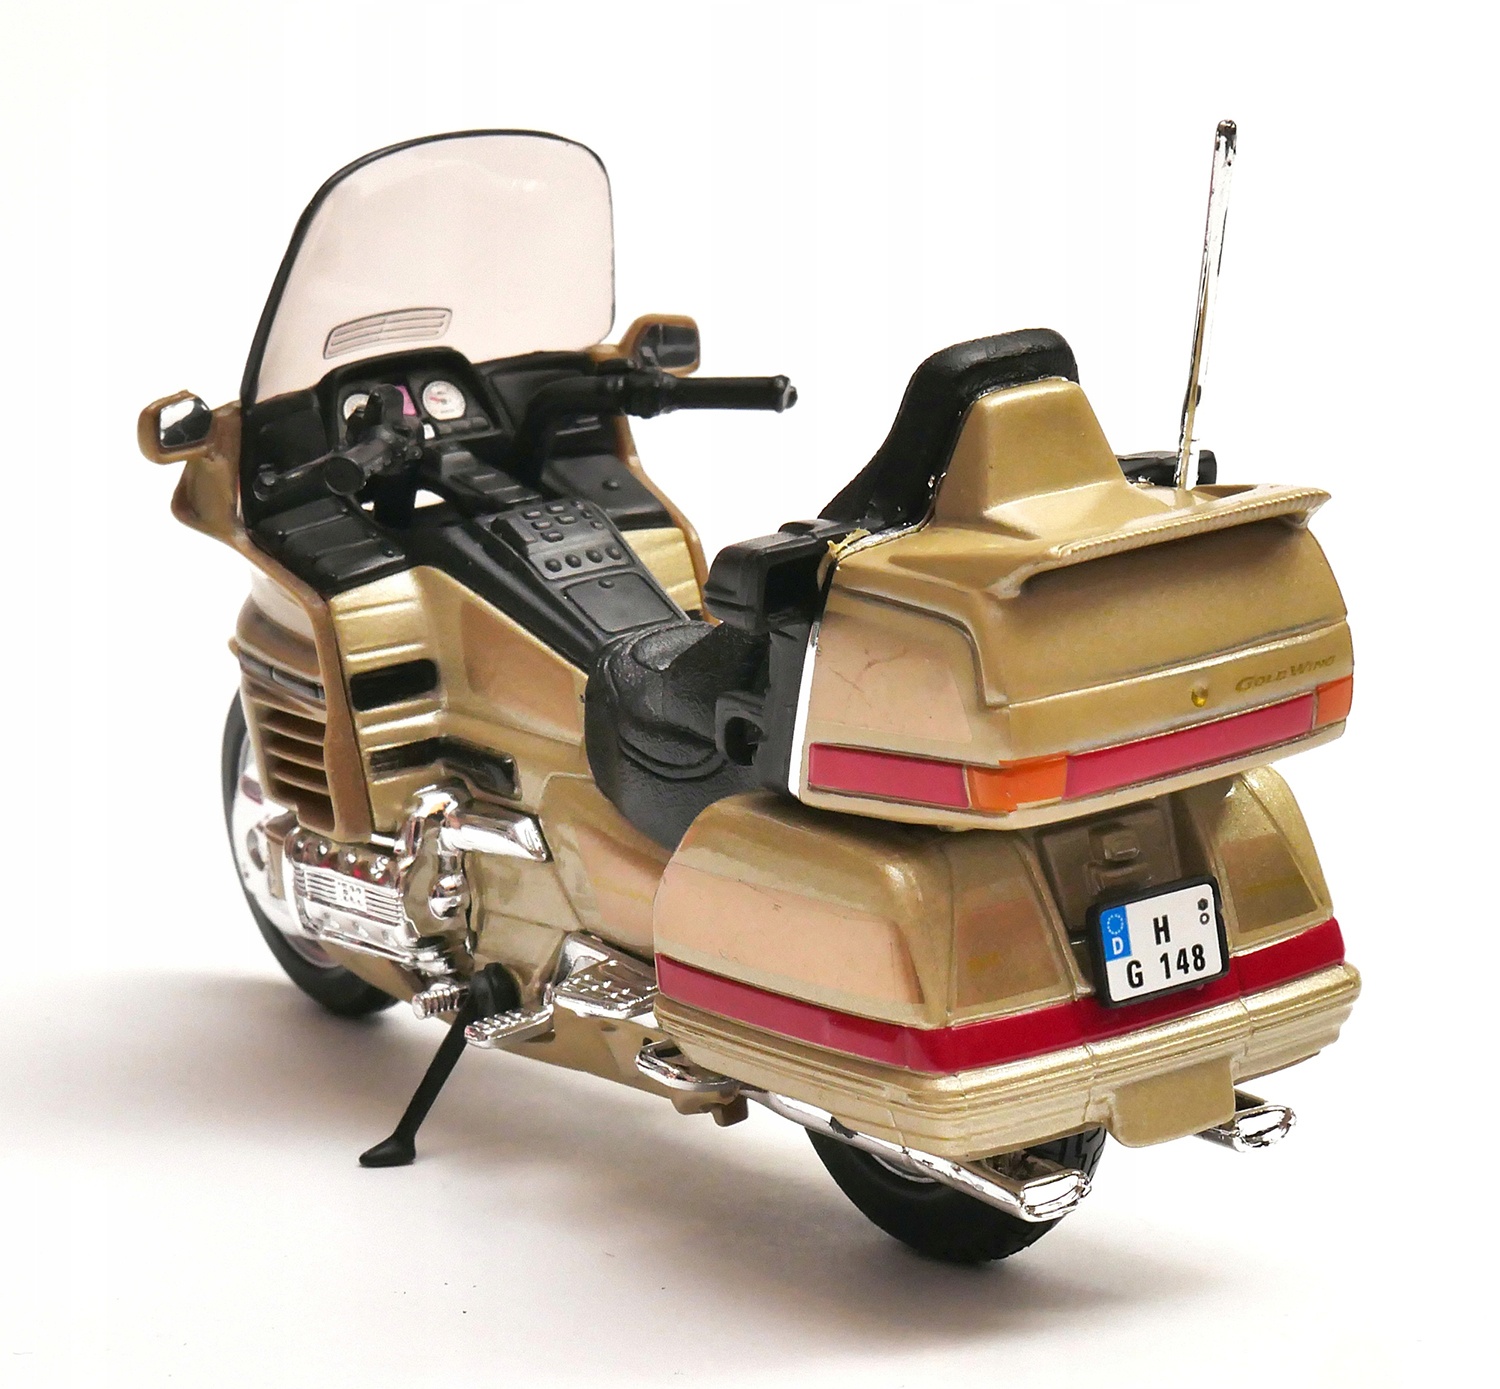 Welly 1:18 Honda Gold Wing